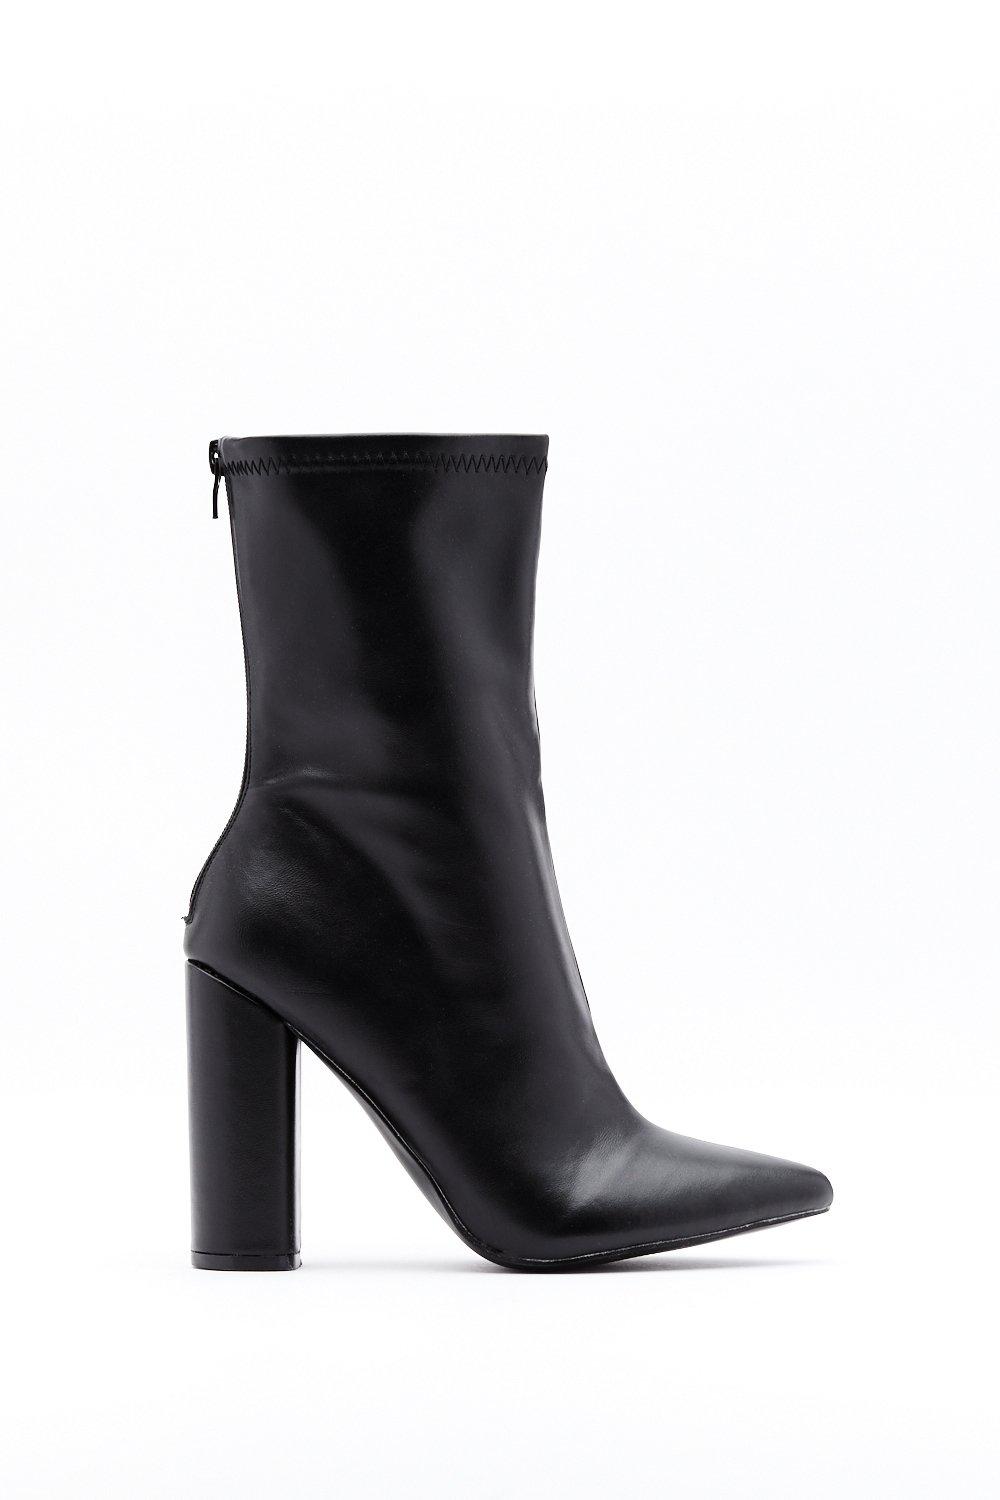 Faux Leather Block Heel Boots with High 